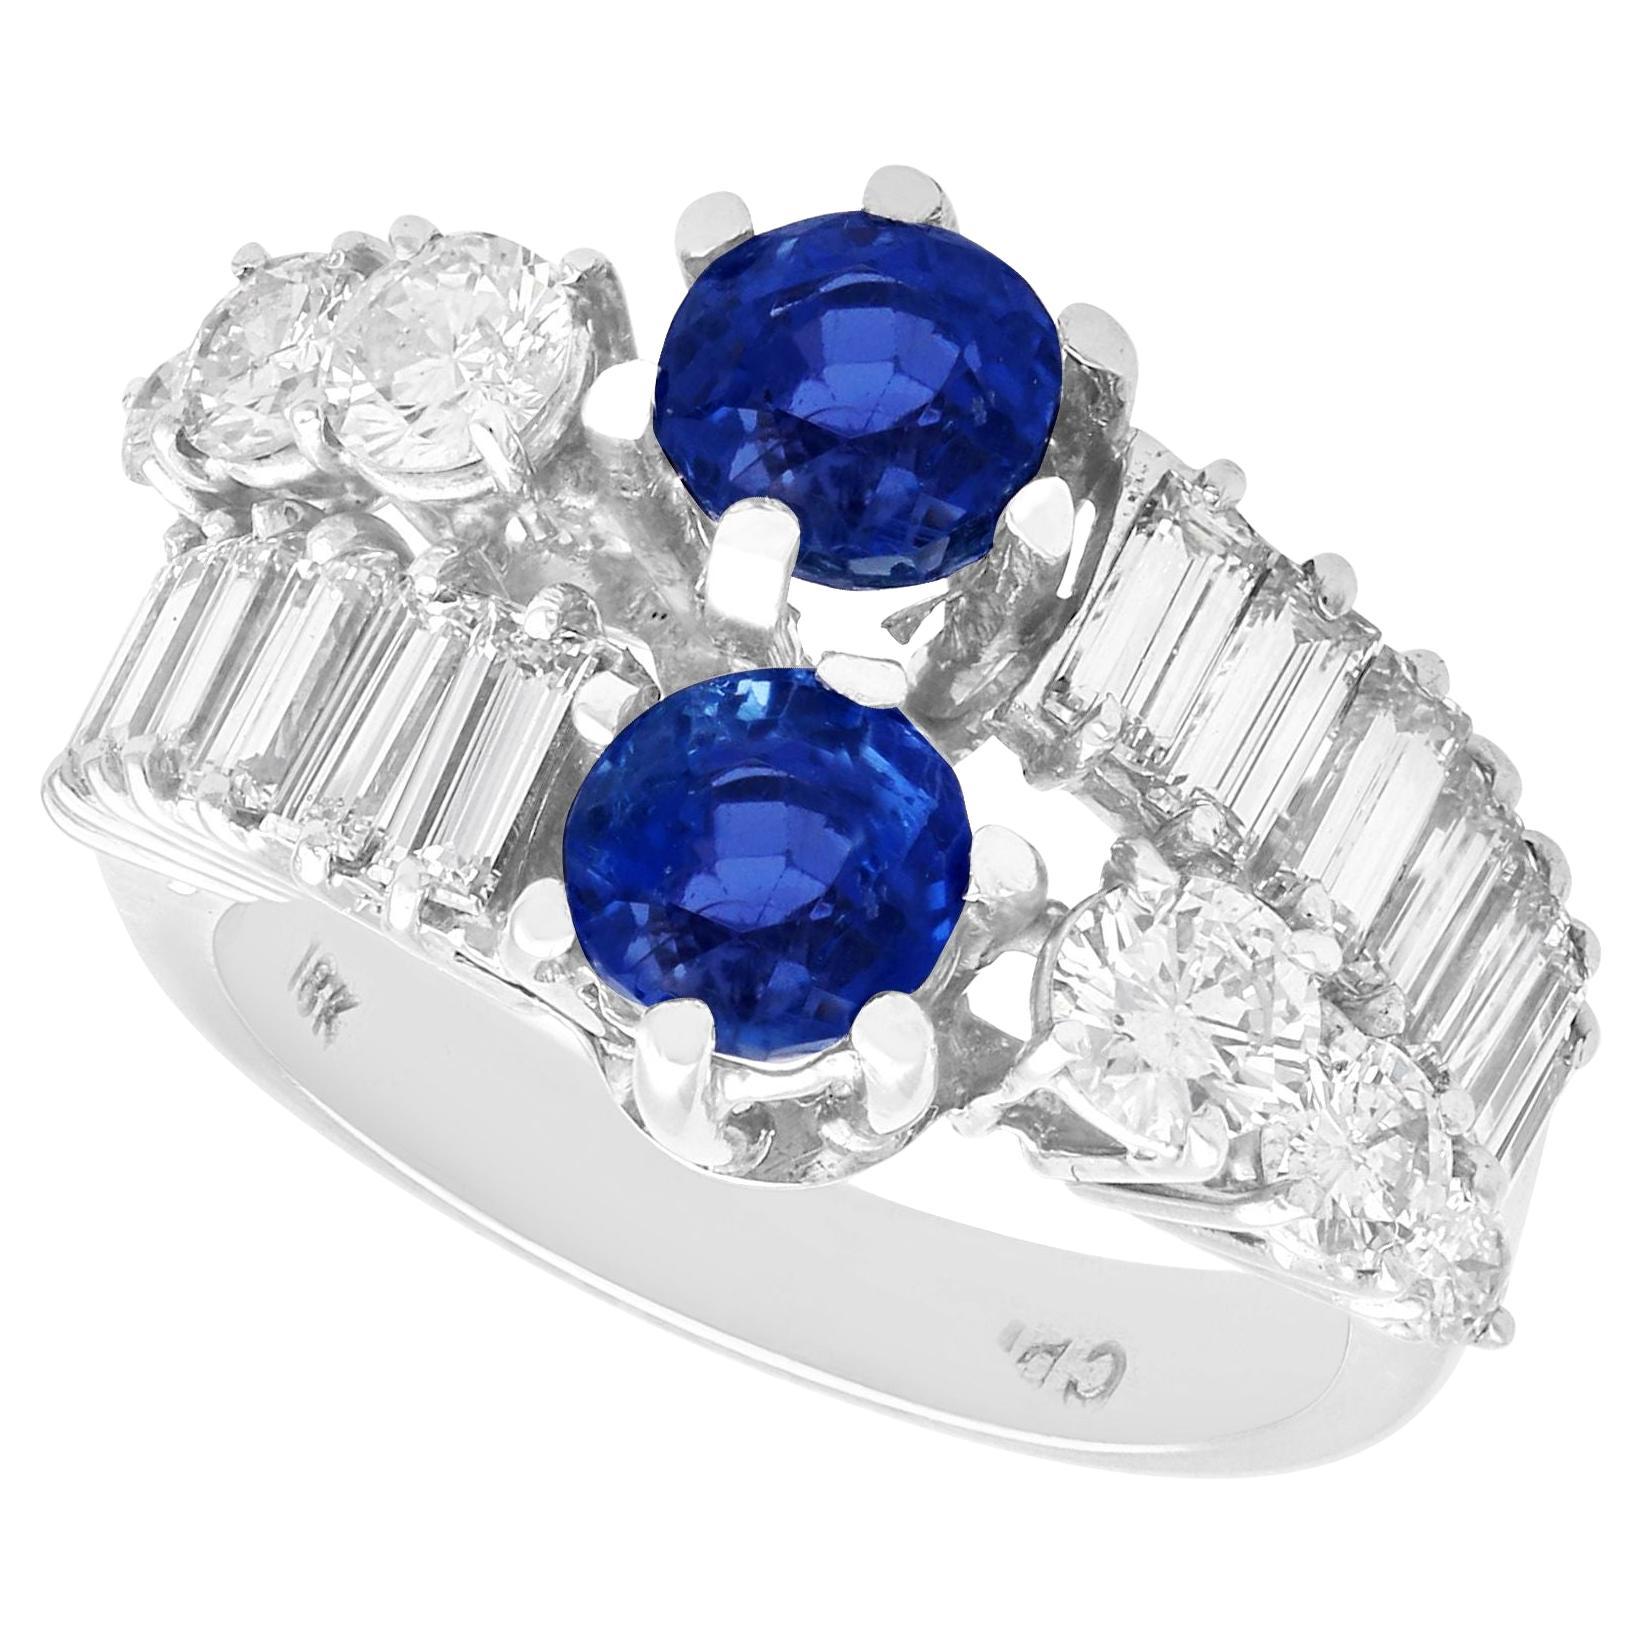 Vintage 1.38ct Sapphire and 2.55ct Diamond 18k White Gold Cocktail Ring